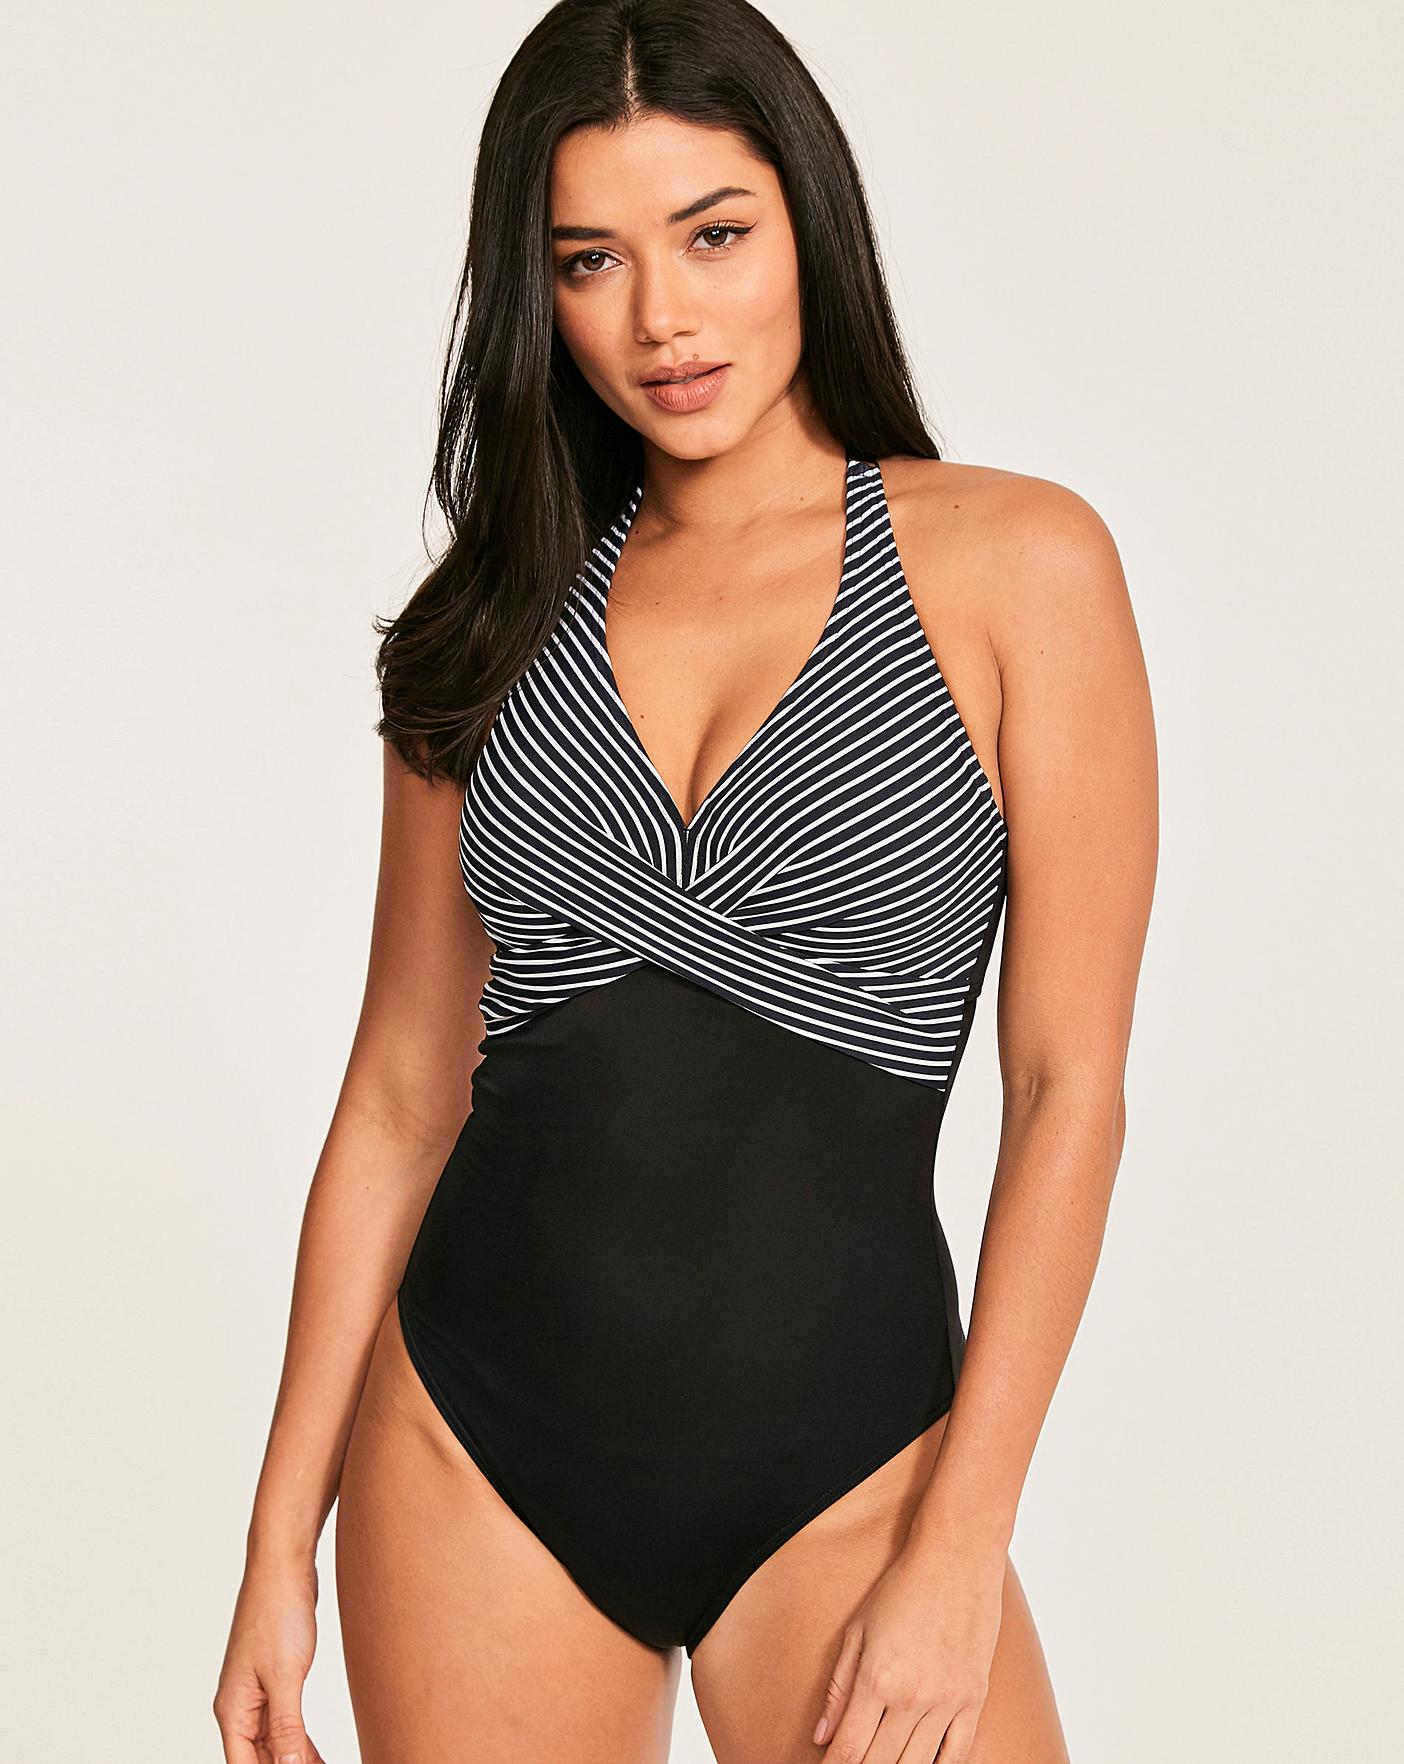 Figleaves Womens Tailor Shaping Stripe One Piece Bathing Suit Size 12 Long in Black Stripe